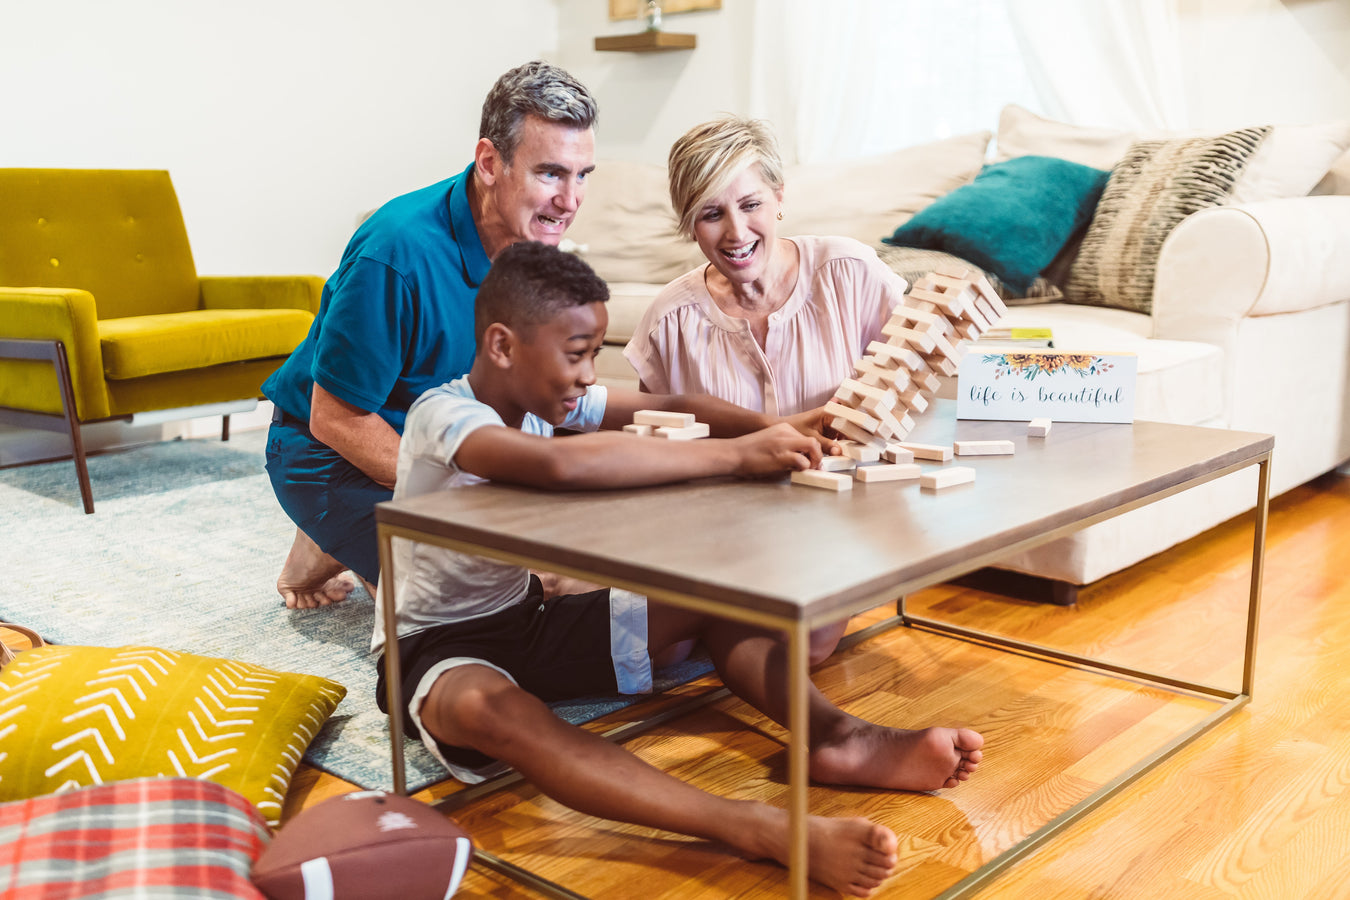 Two adults and a child playing Jenga together at living room table